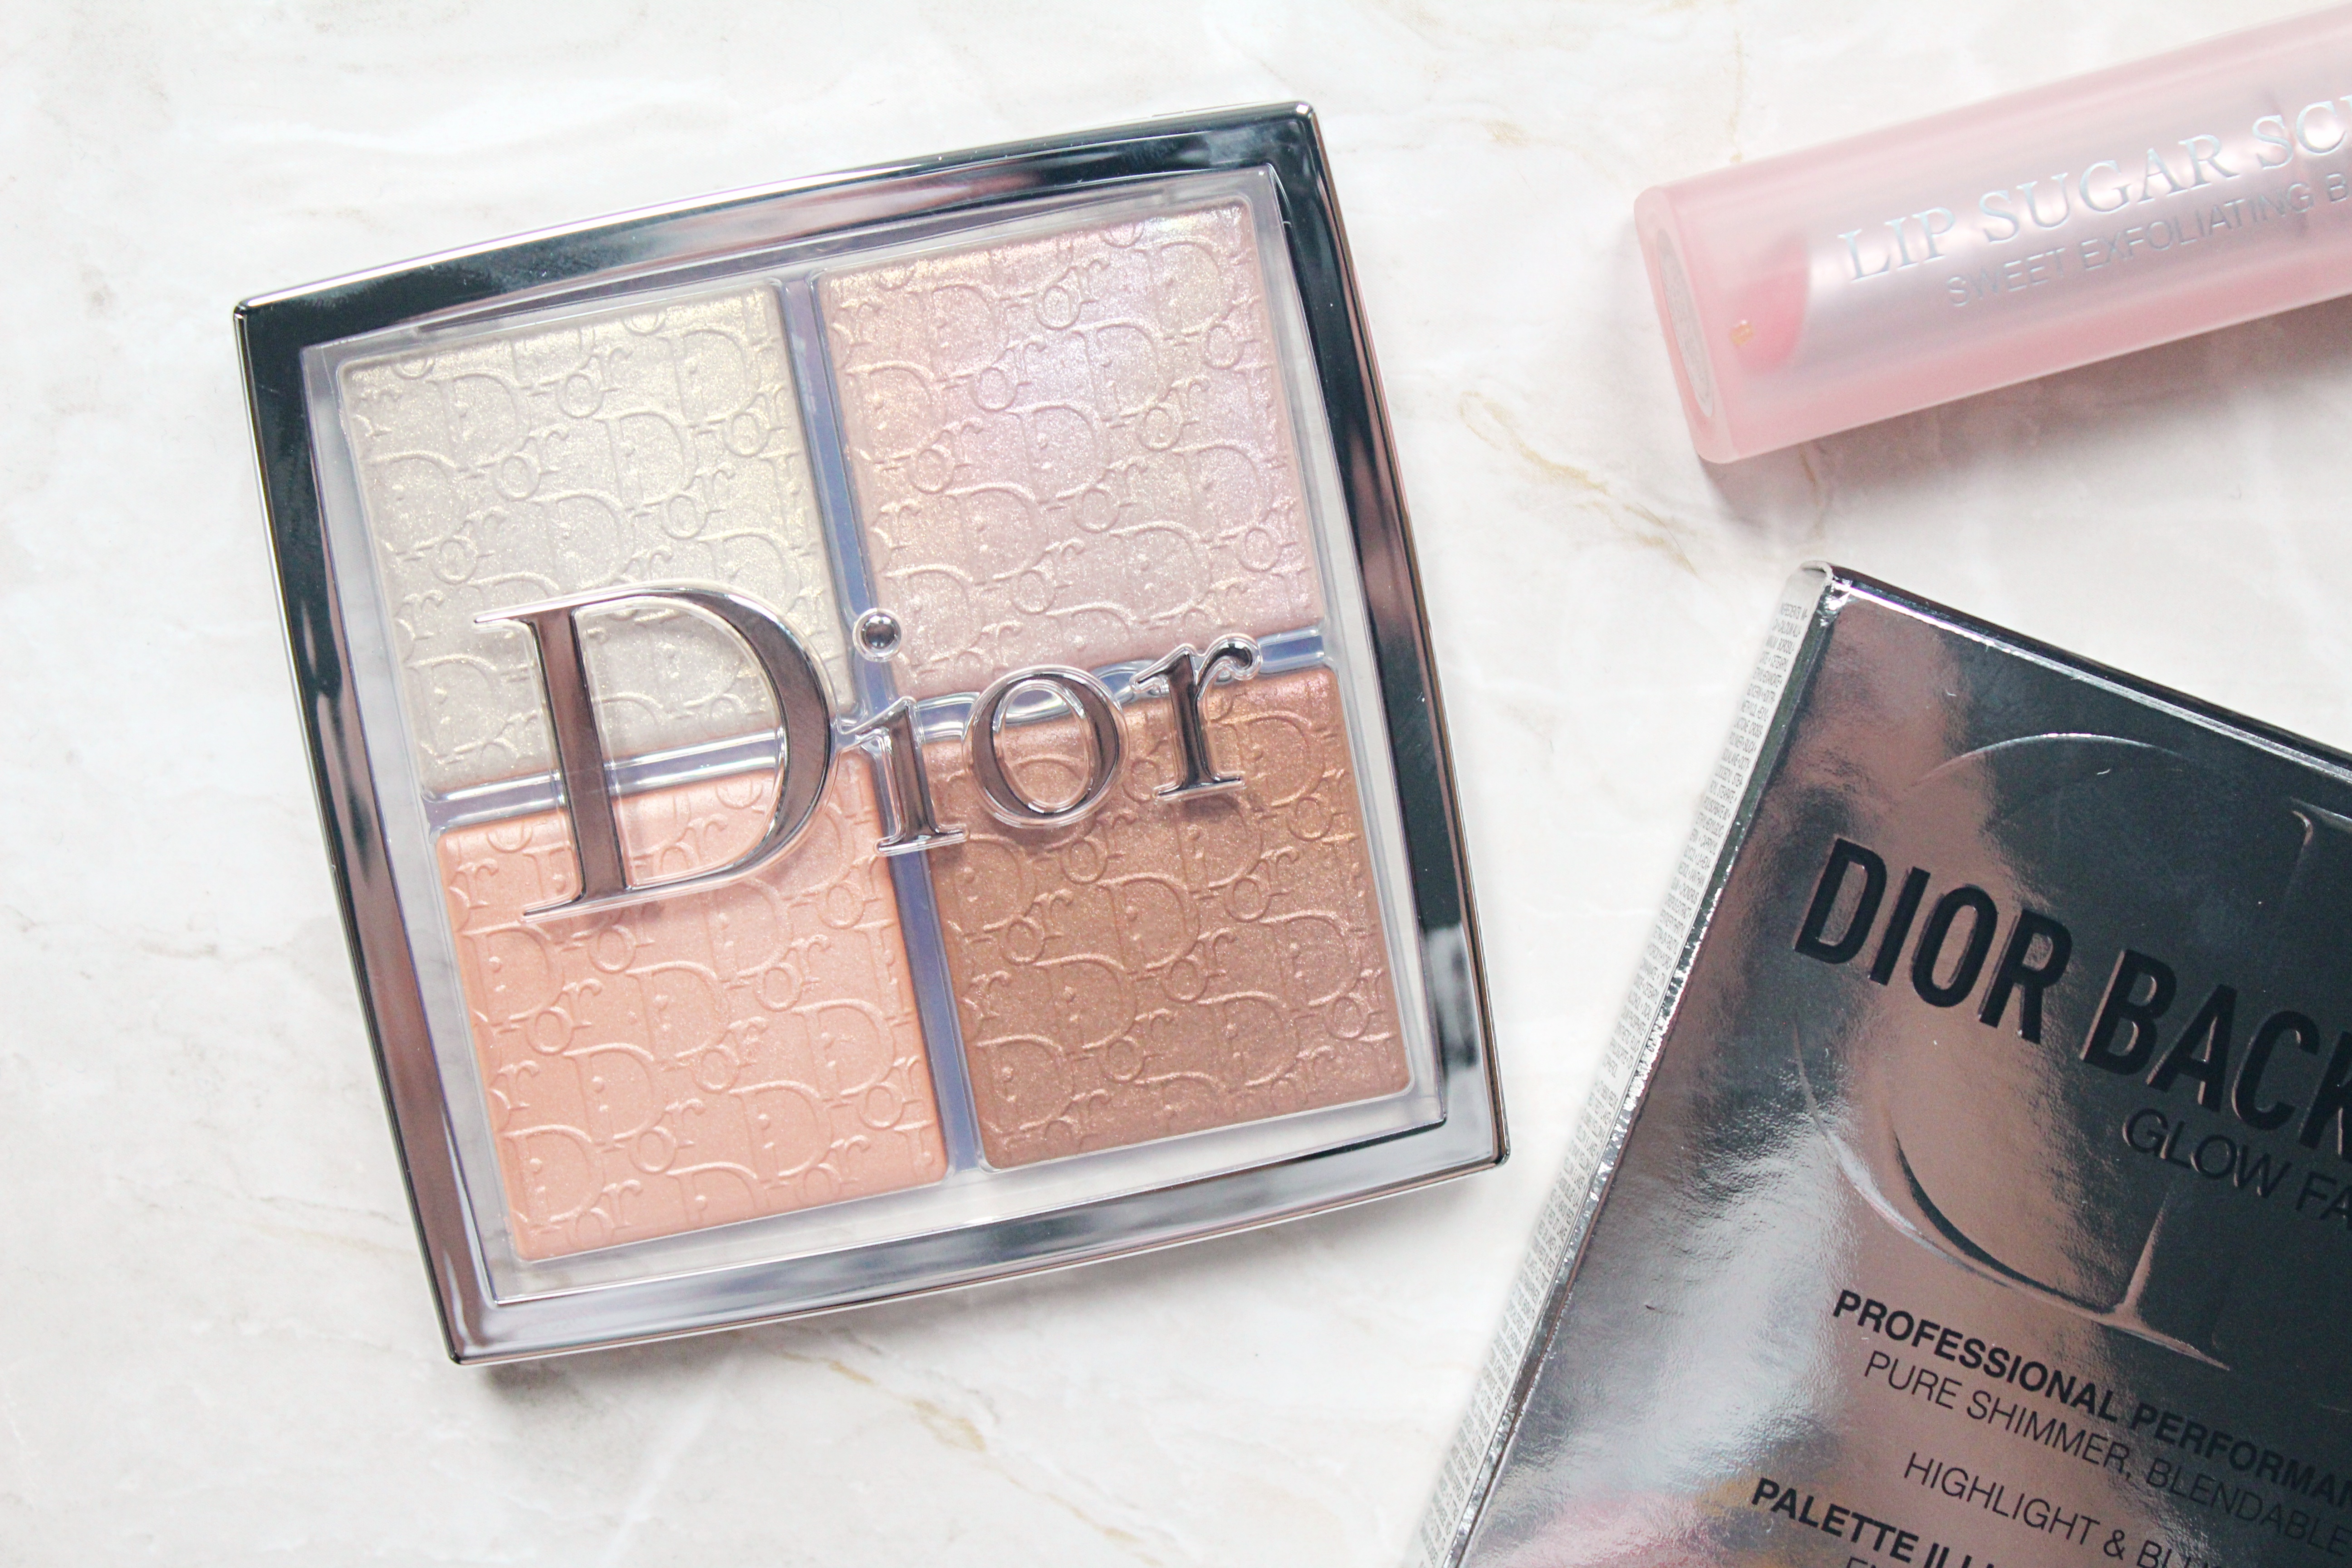 Has anyone tried the reformulated version of Dior Backstage Face  Body  What are your thoughts  rSephora